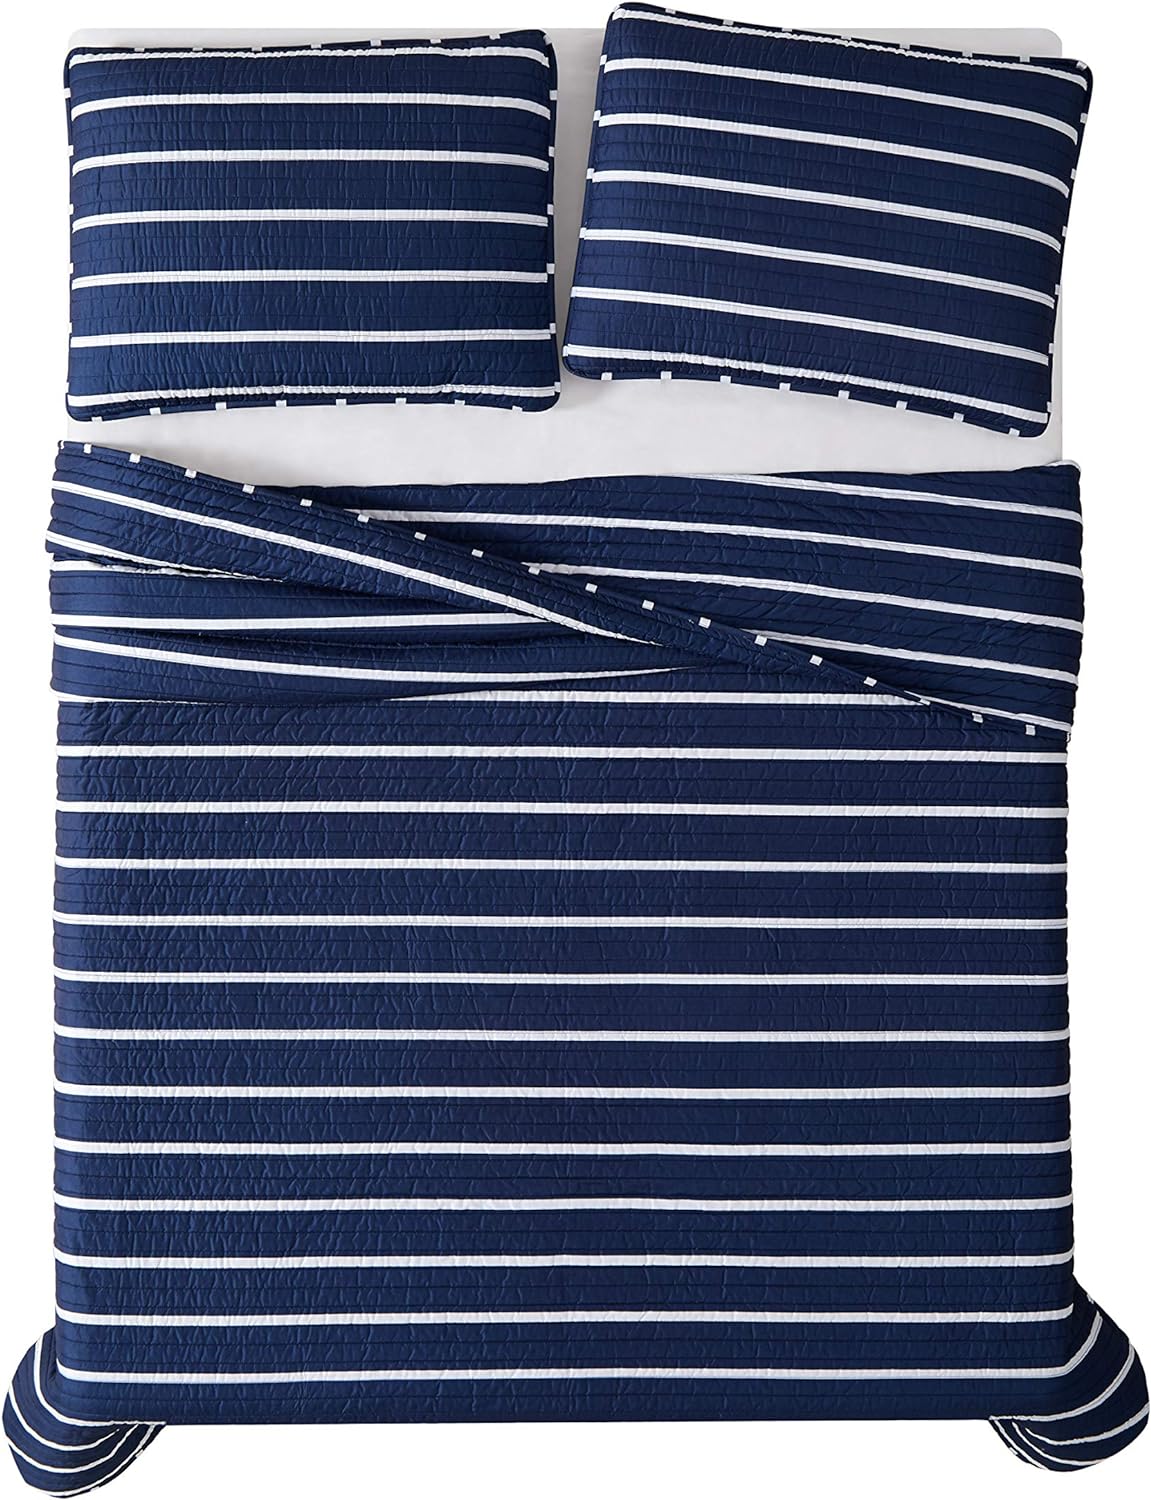 Truly Soft Everyday Maddow Stripe Quilt Set